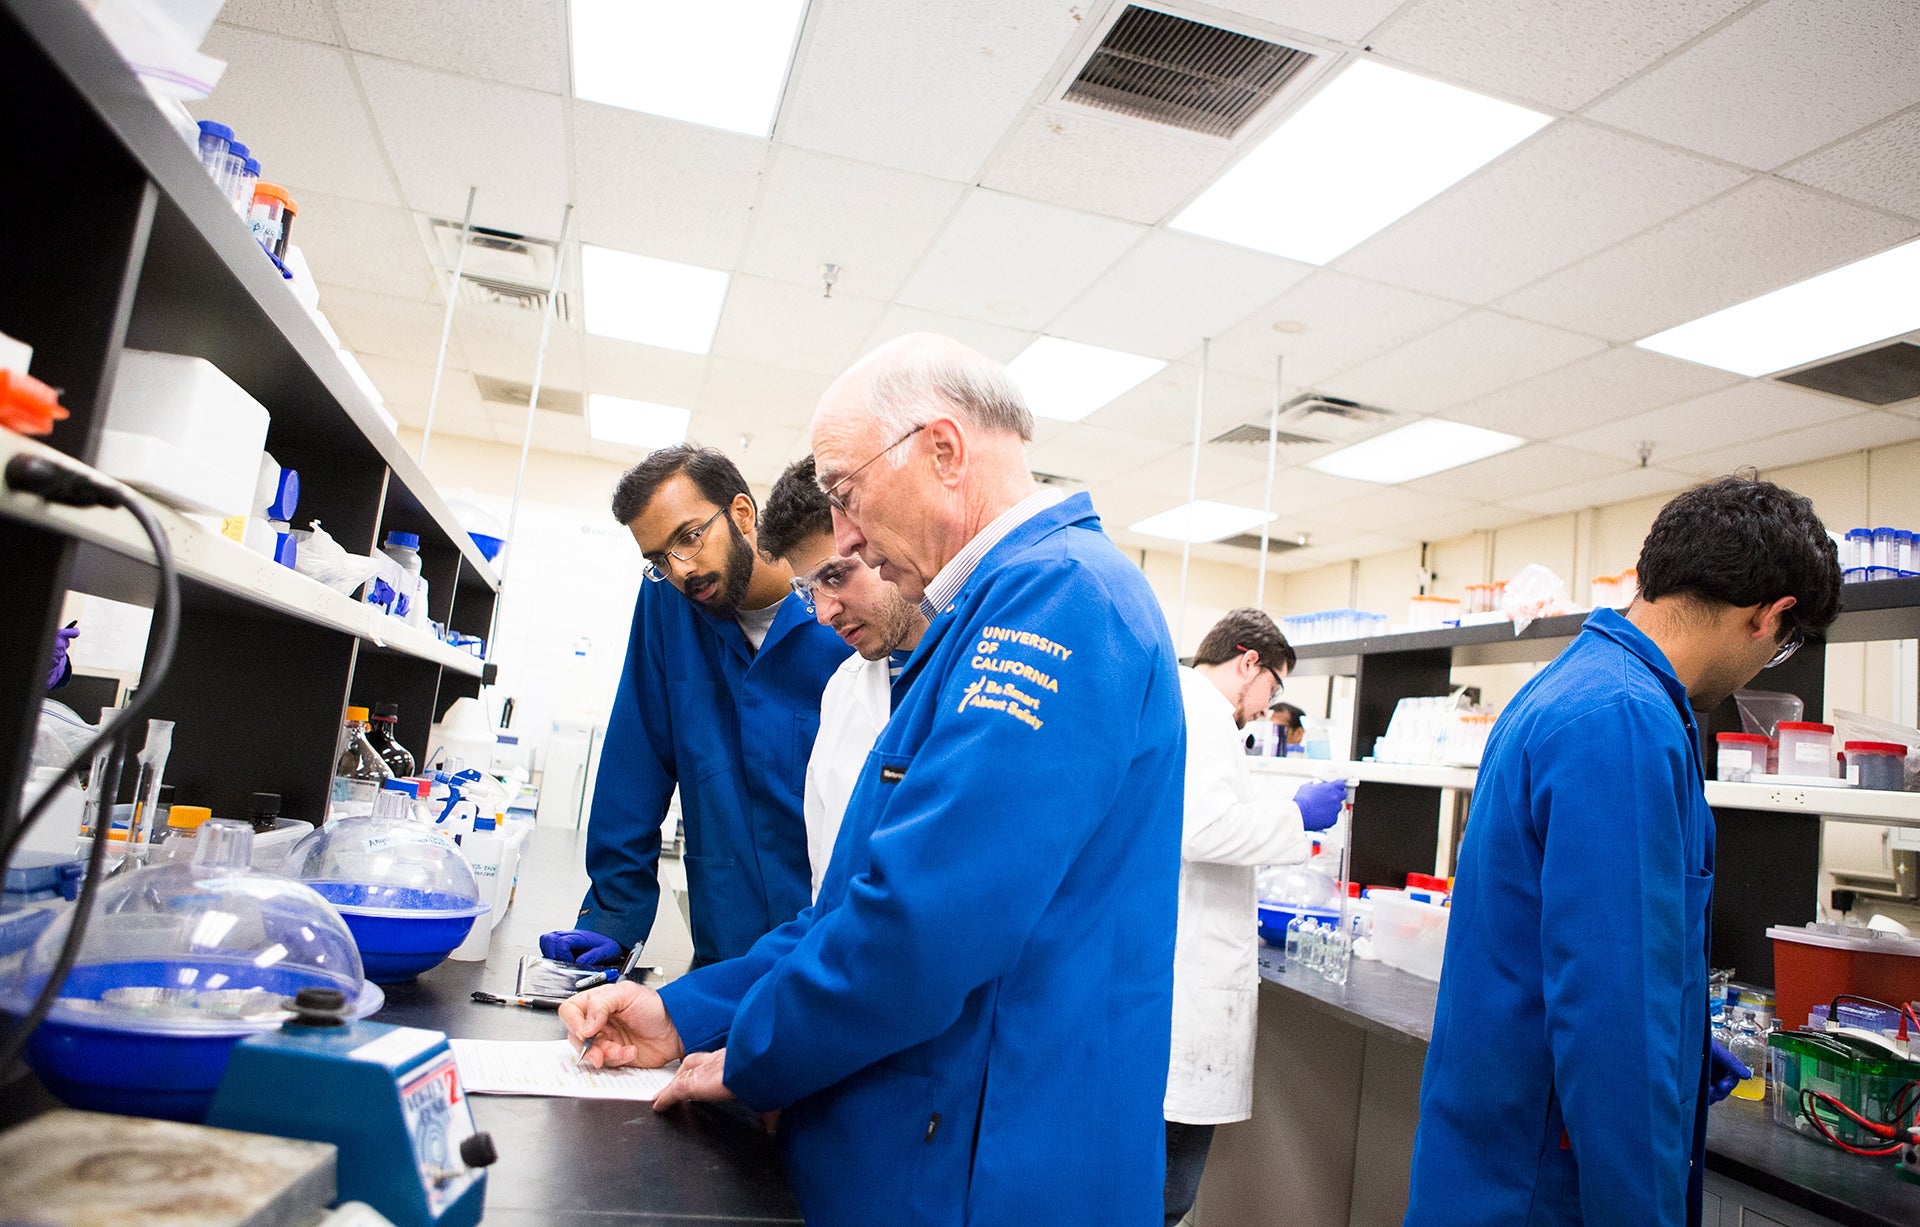 Students Working with Professor on Lab Works